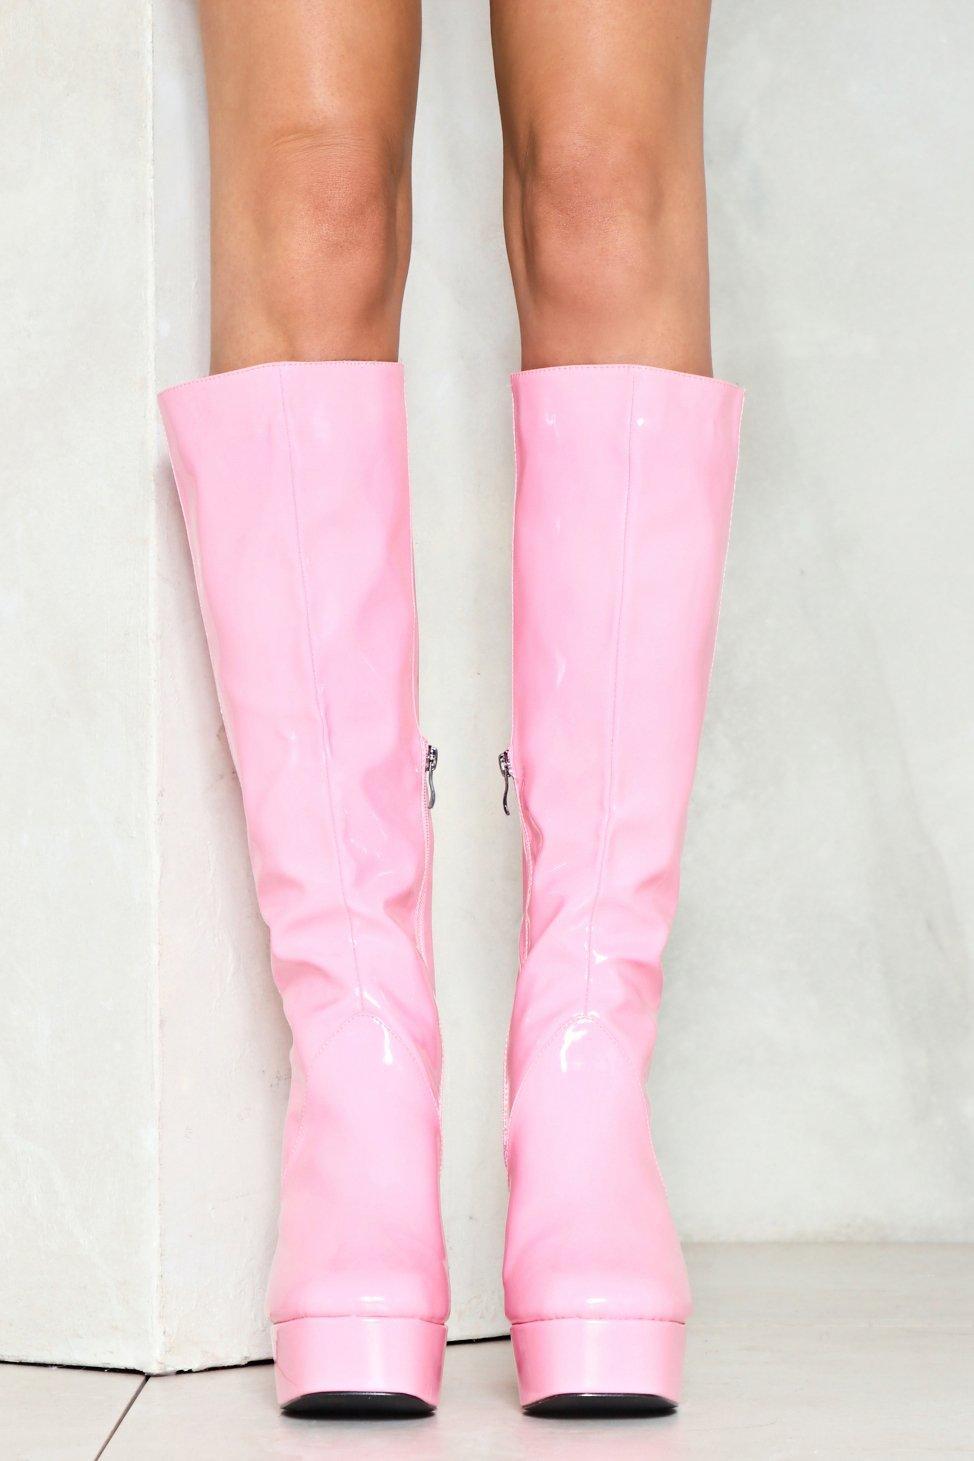 Nasty Gal Baby Spice Knee-high Boot Baby Spice Knee-high Boot in Pink ...